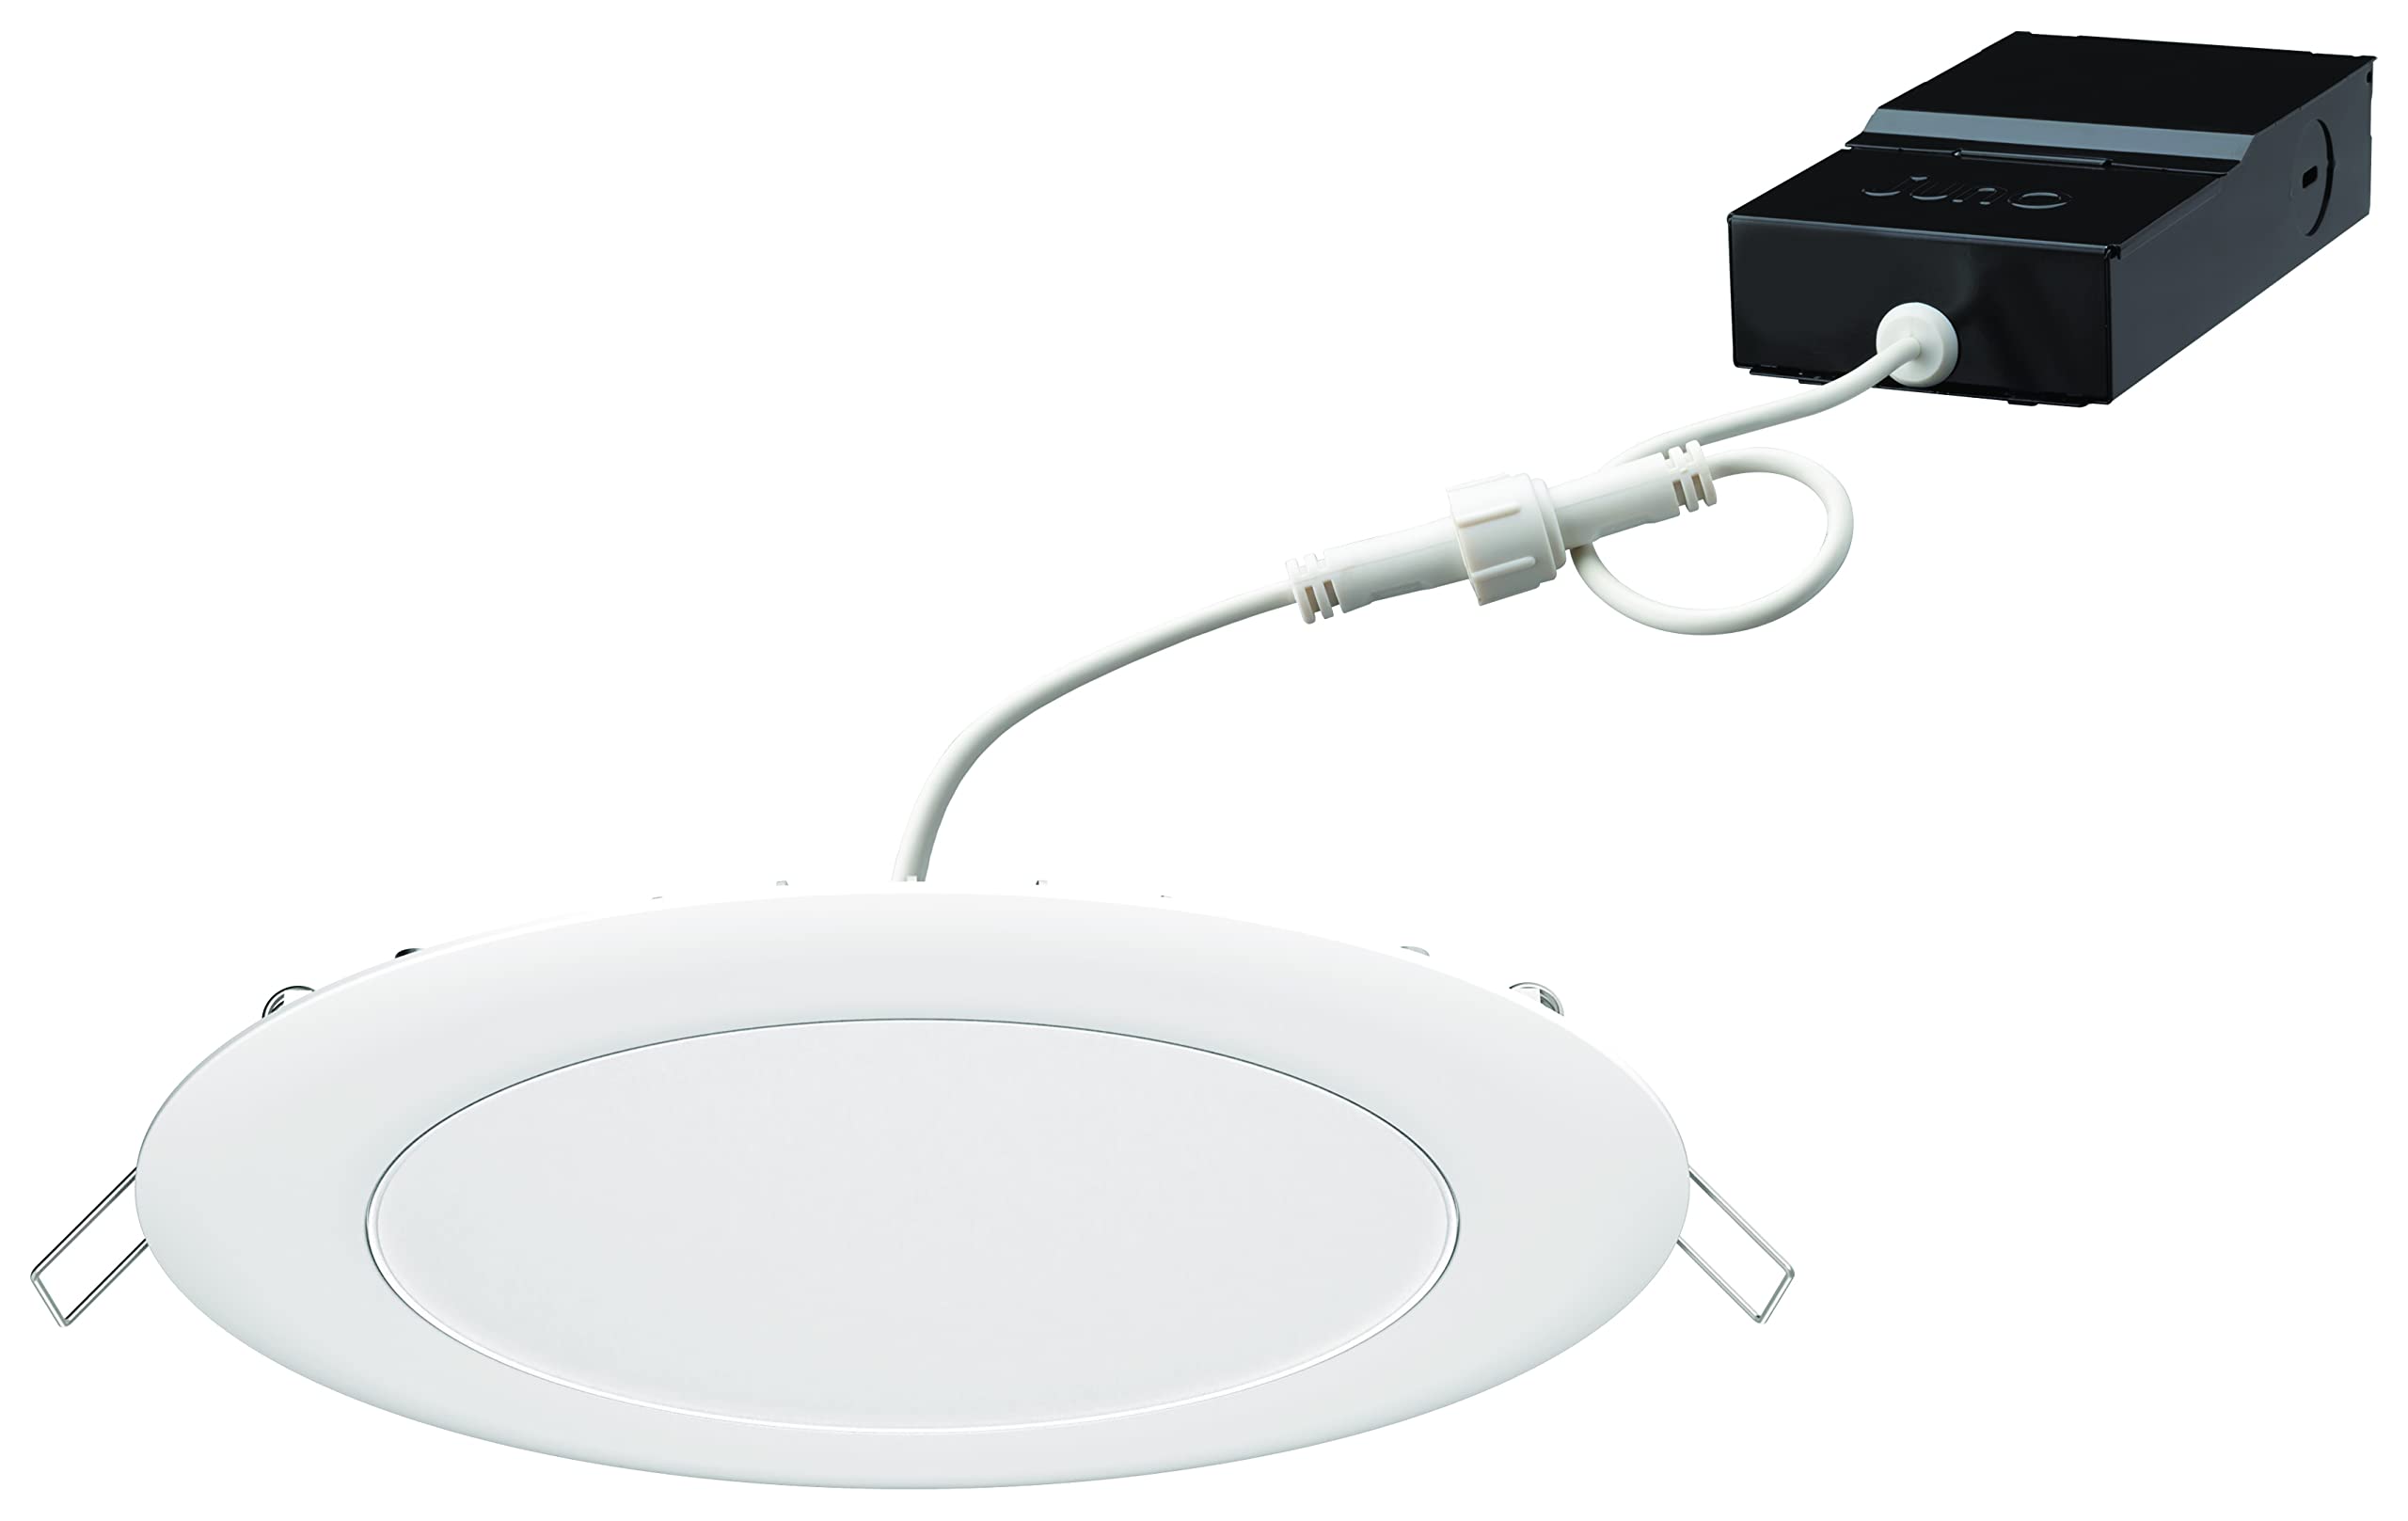 Juno WF6C RD TUWH MW M6 Smart LED Wafer Downlight, 2700K-5000K Tunable White, Dimmable, Zigbee or Bluetooth Connection, Use with Alexa, Google Home, SmartThings, Ultra Thin, 6 Inch, Matte White